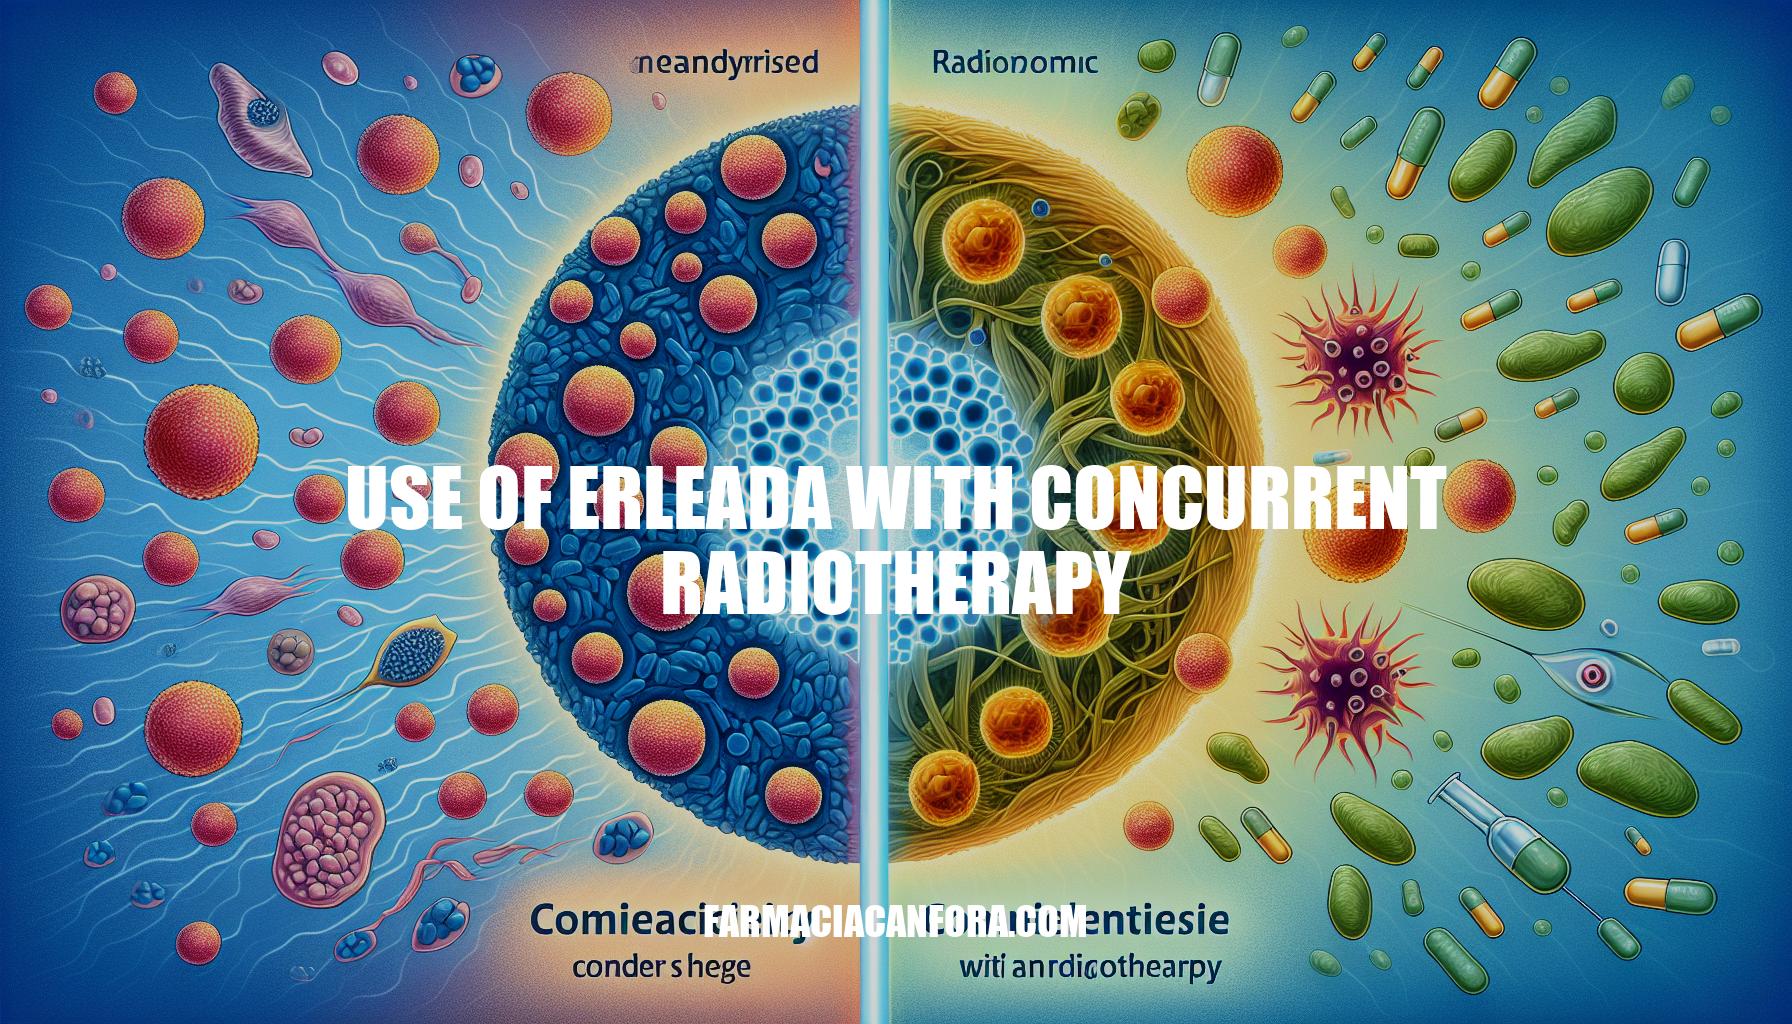 Benefits of Using Erleada with Concurrent Radiotherapy